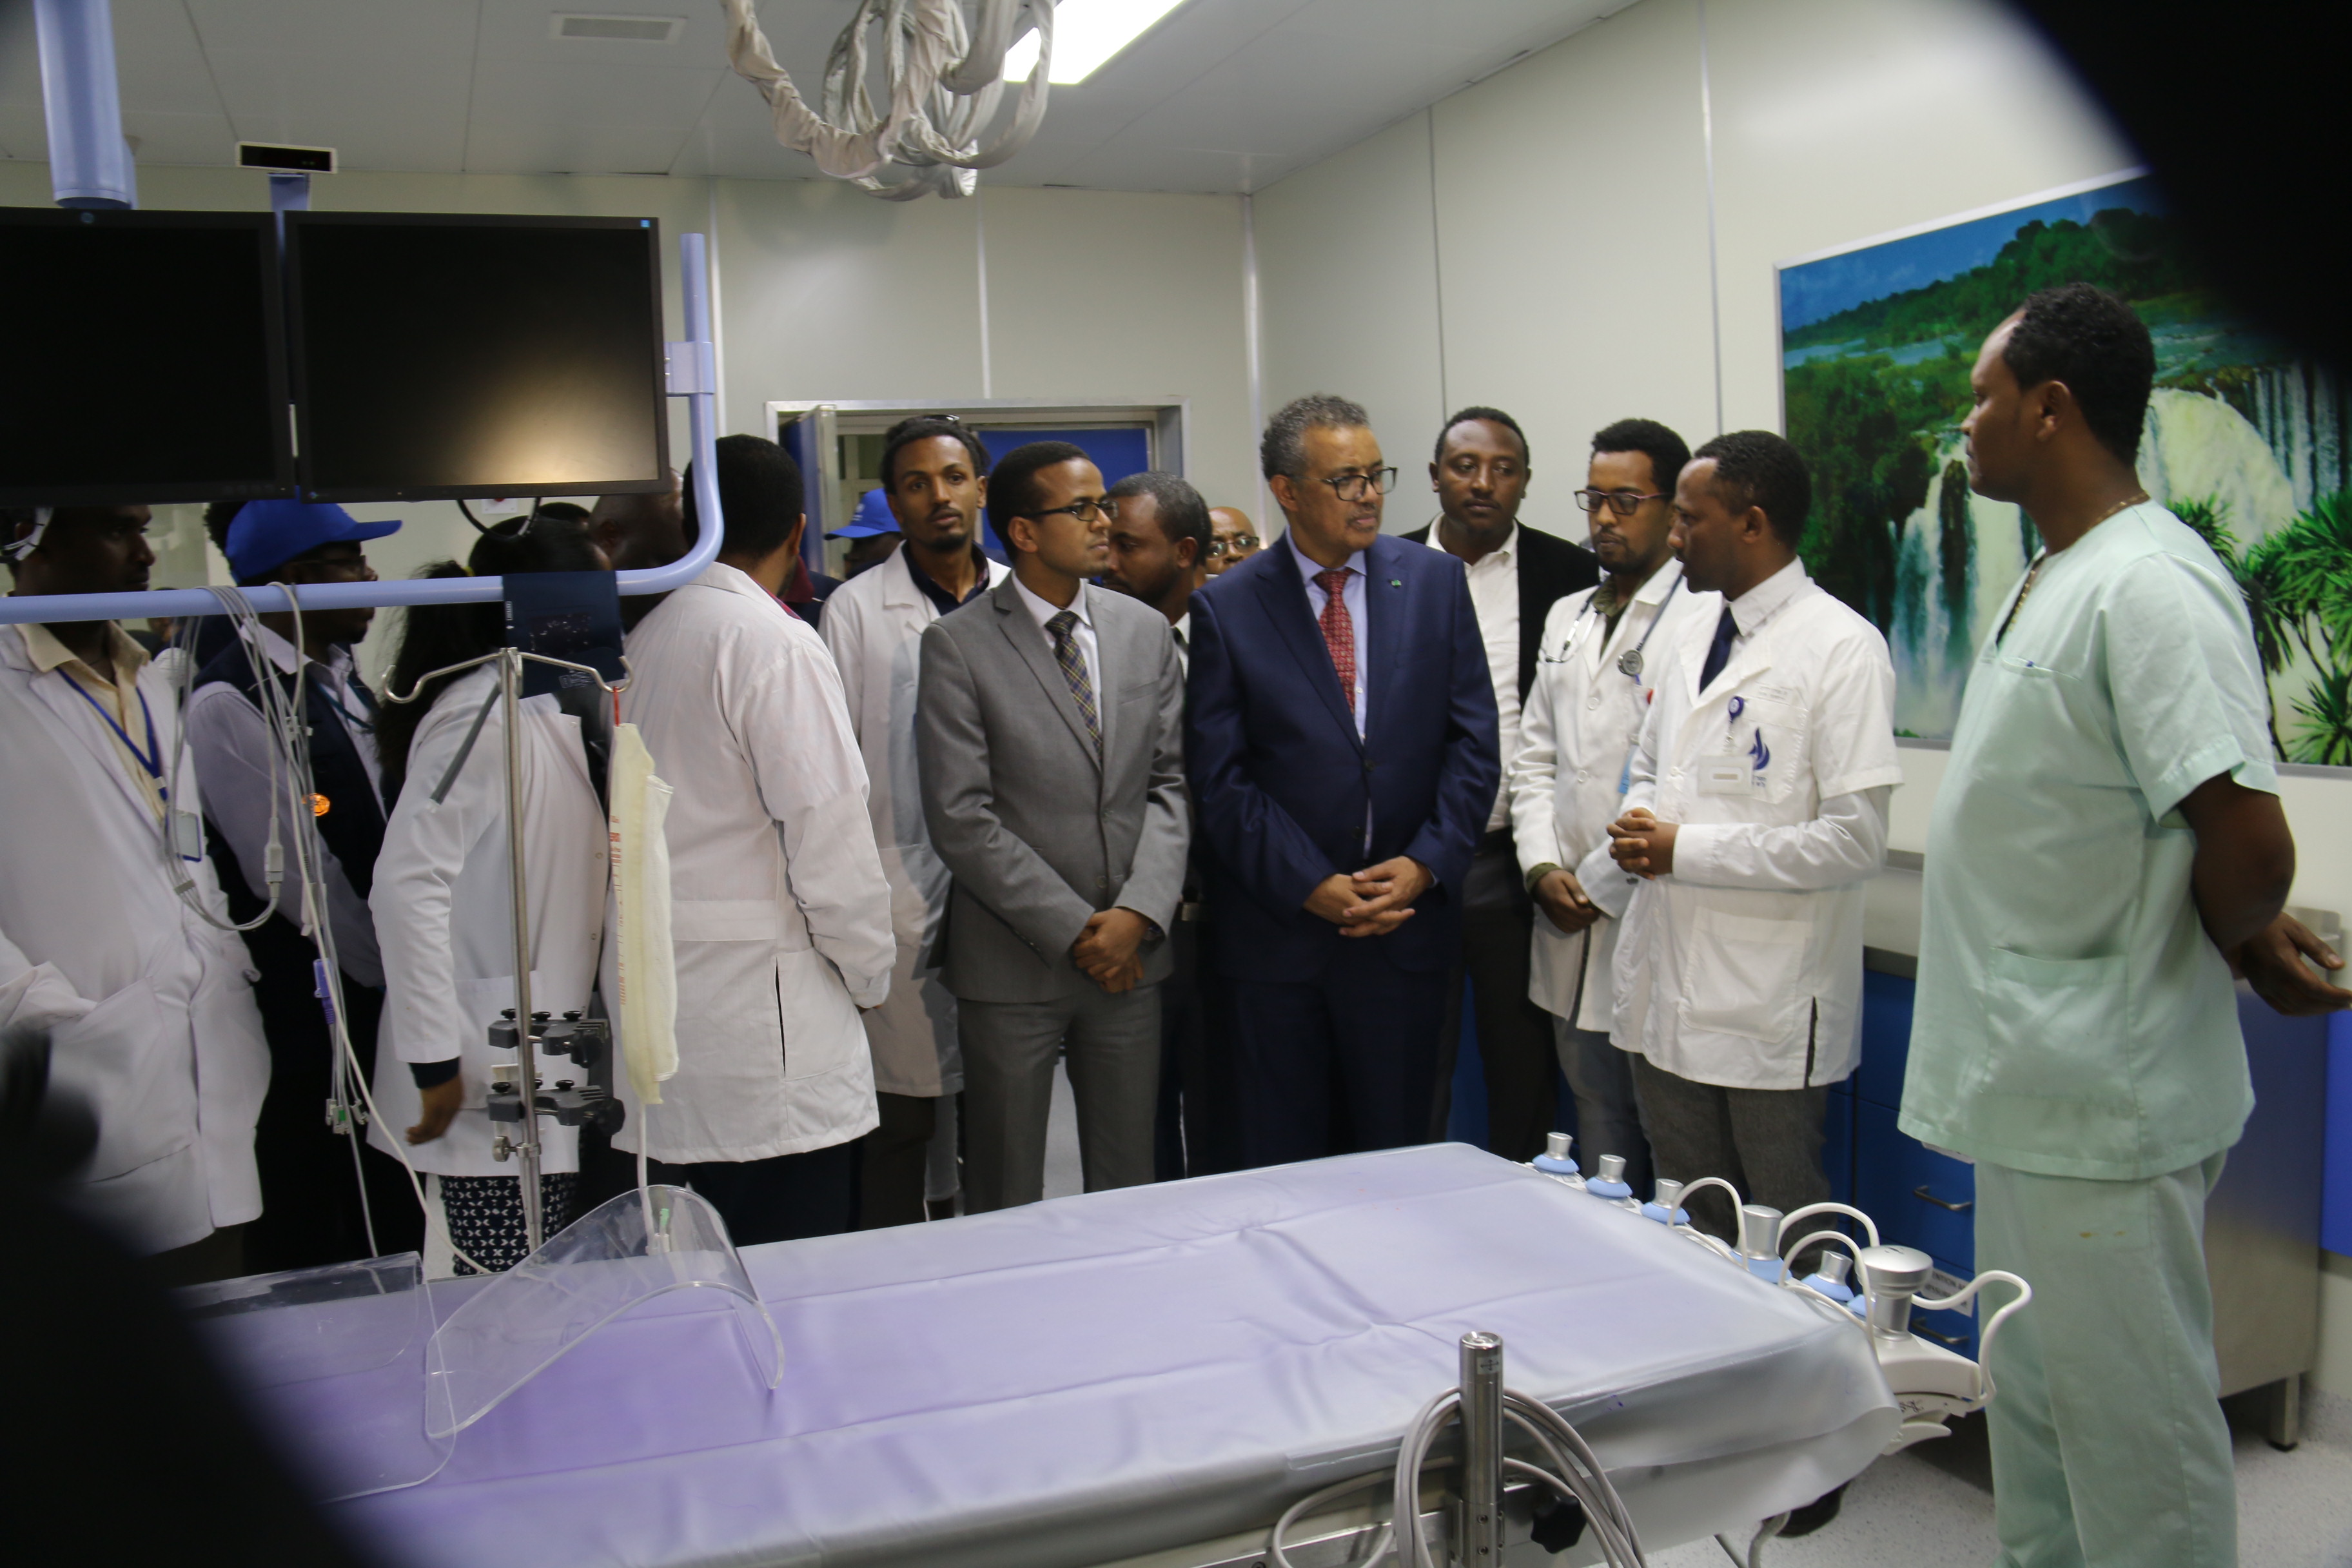 Dr tedros visiting the health facility